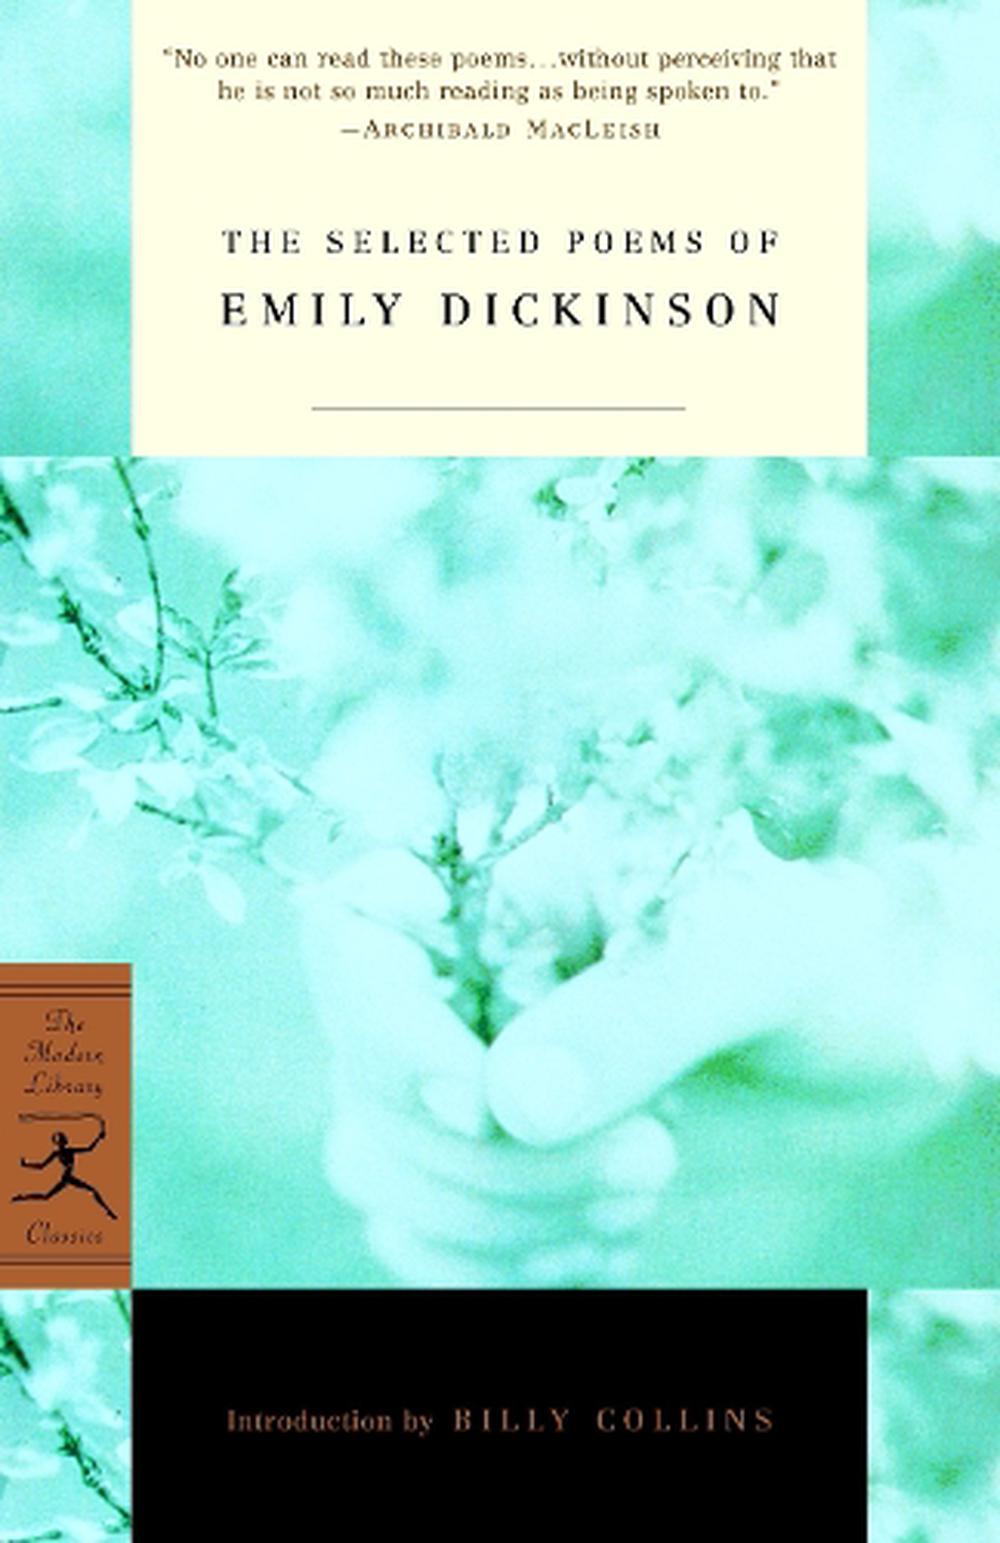 Poems　Selected　The　Dickinson,　The　by　Buy　at　Dickinson　of　online　Emily　9780679783350　Paperback,　Emily　Nile